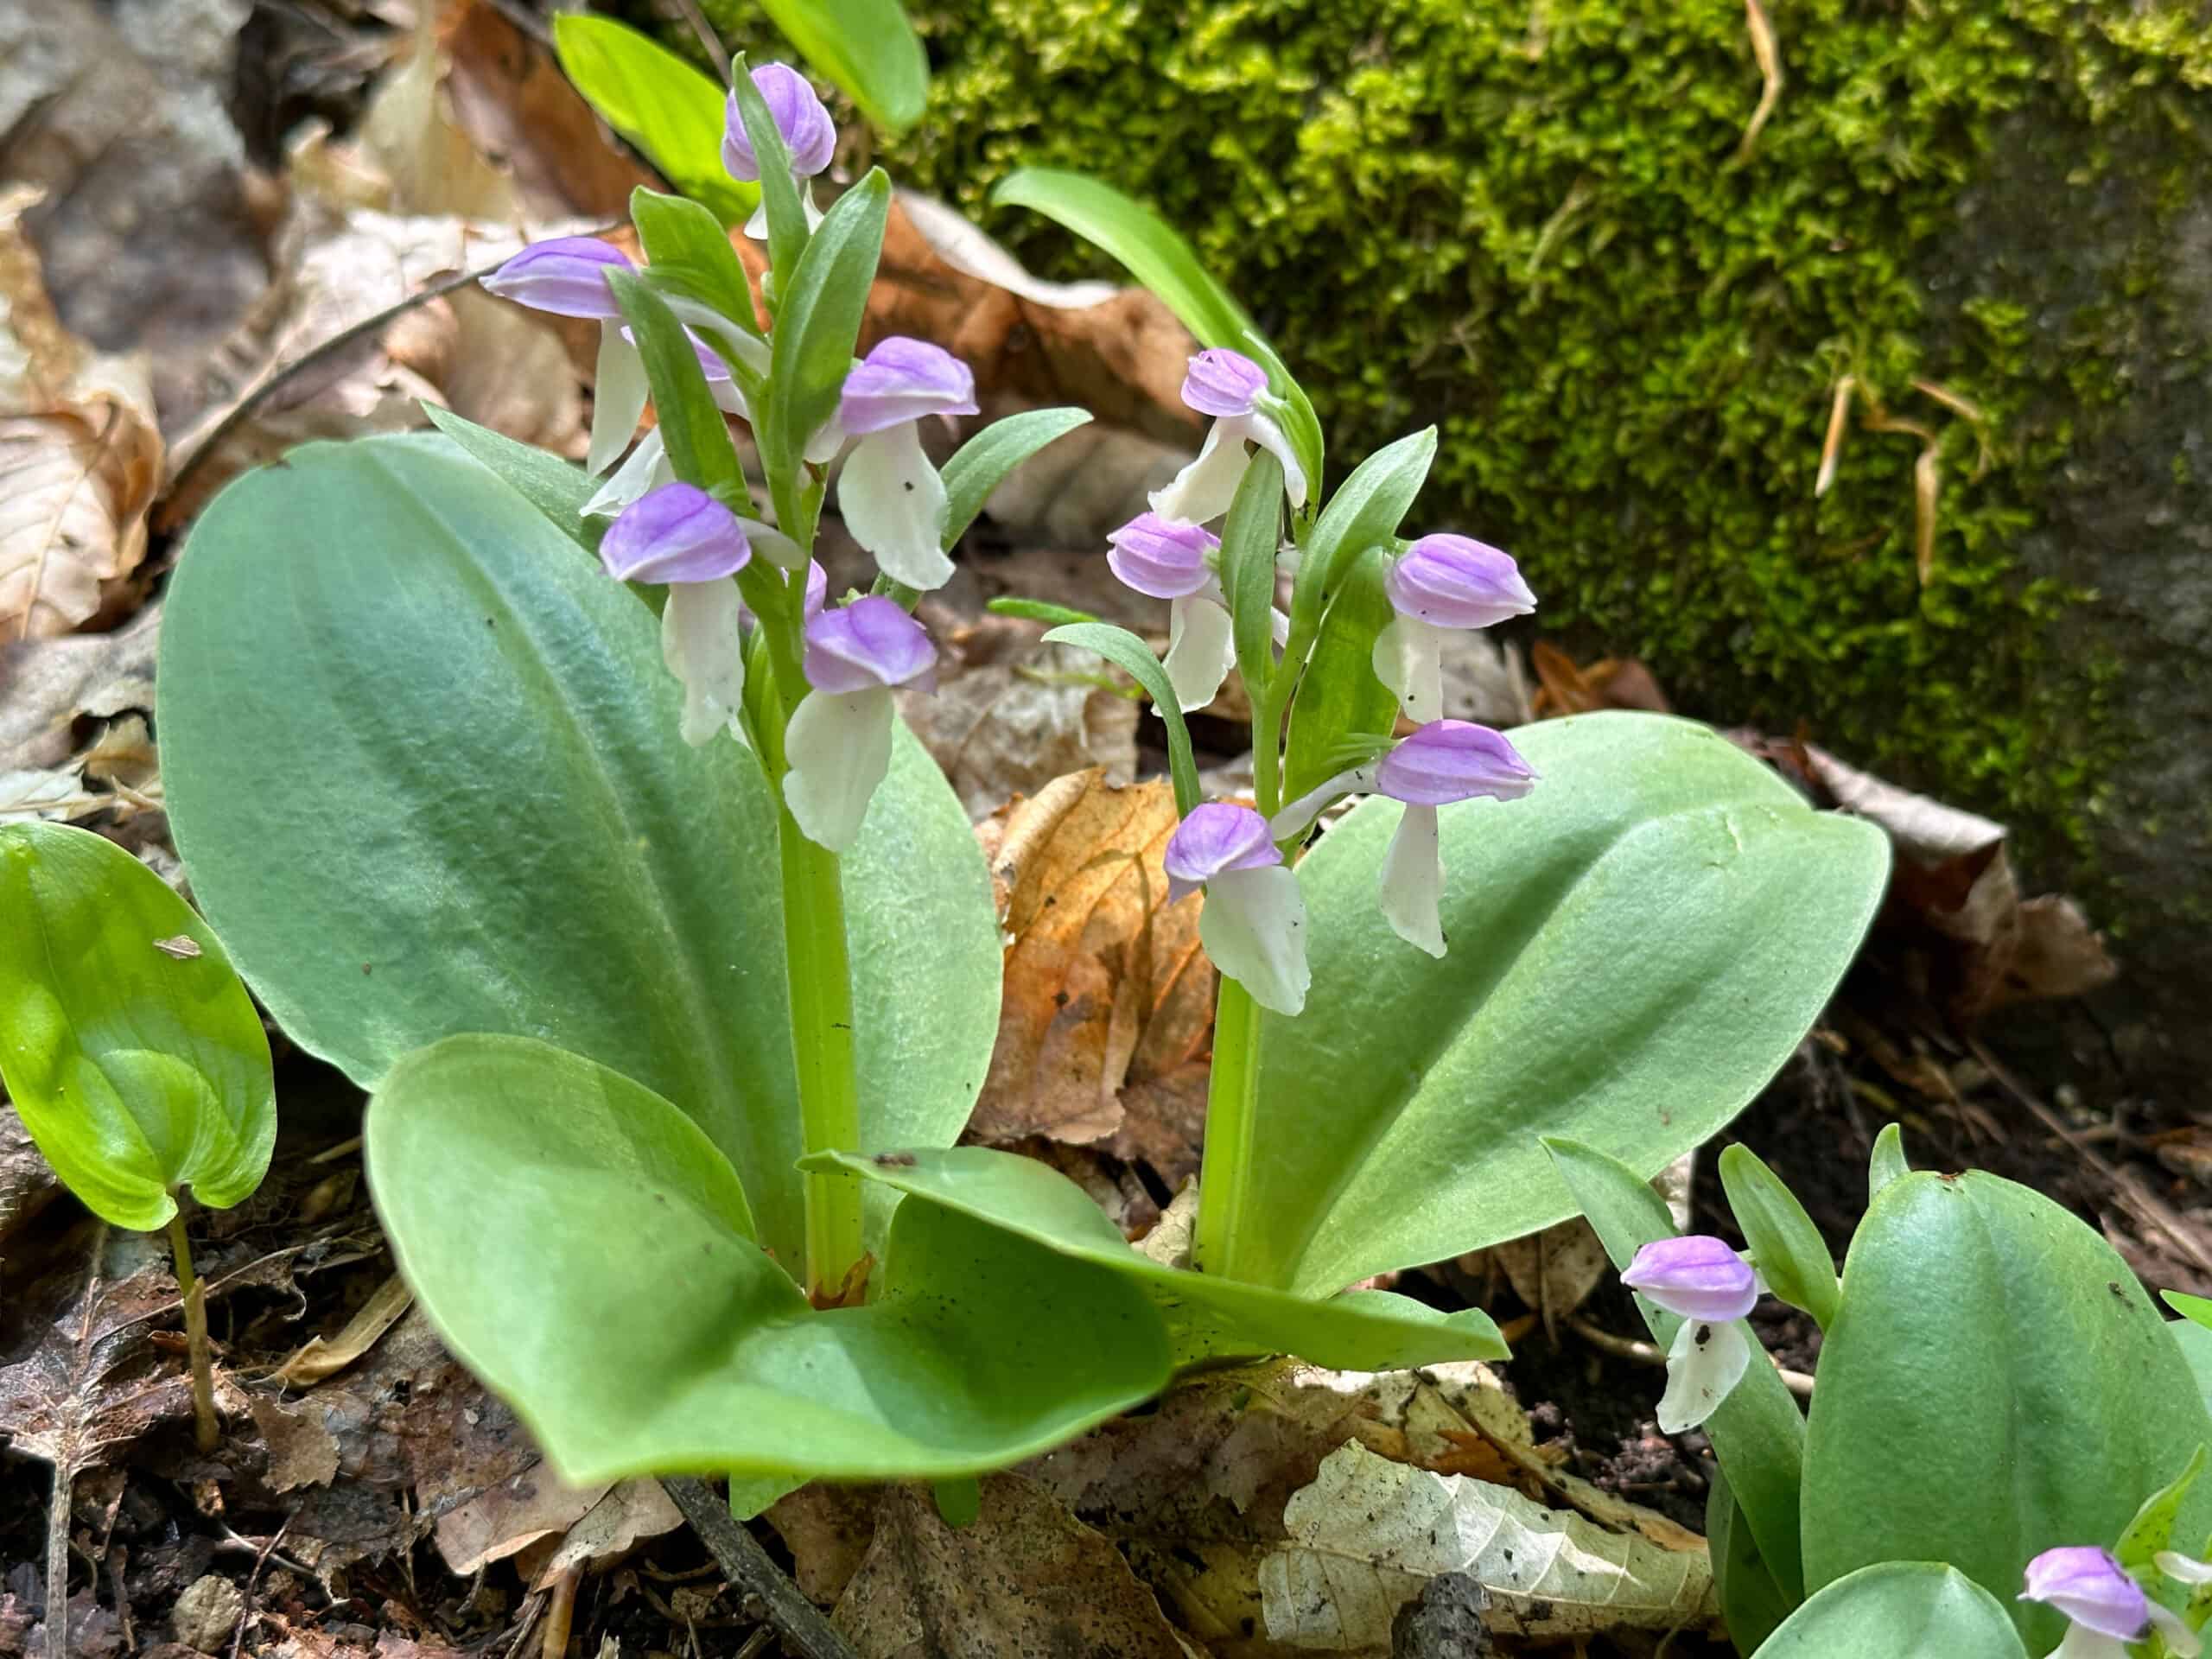 Showy orchis in flower; purple and white lipped flowers